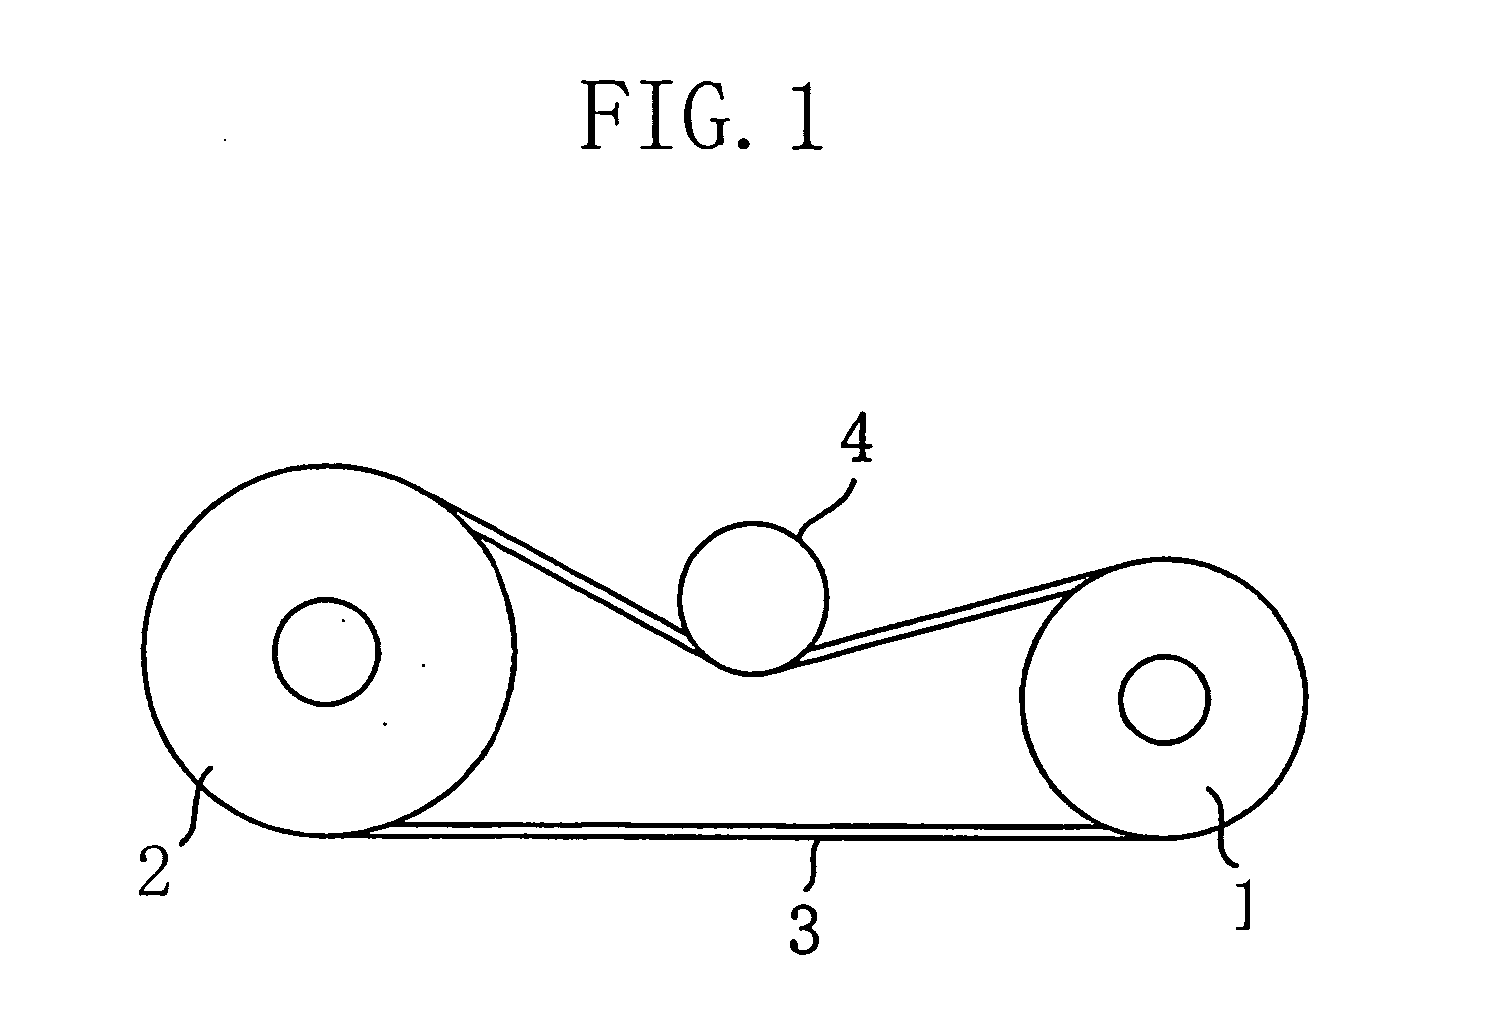 Drive belt pulley and belt drive system